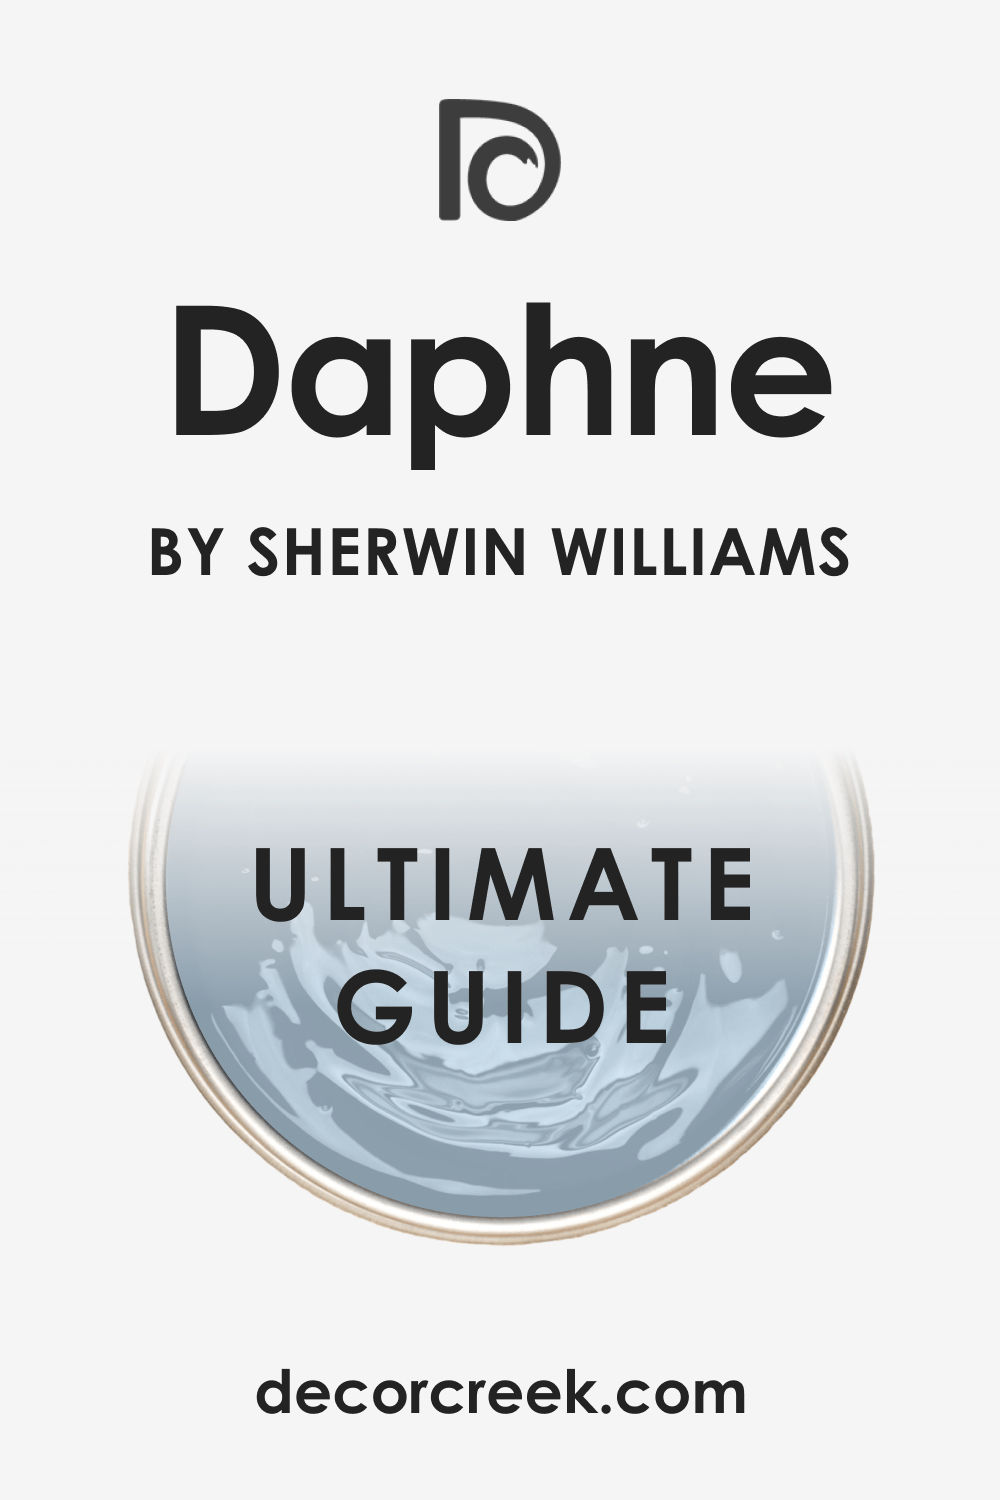 Ultimate Guide of Daphne SW-9151 